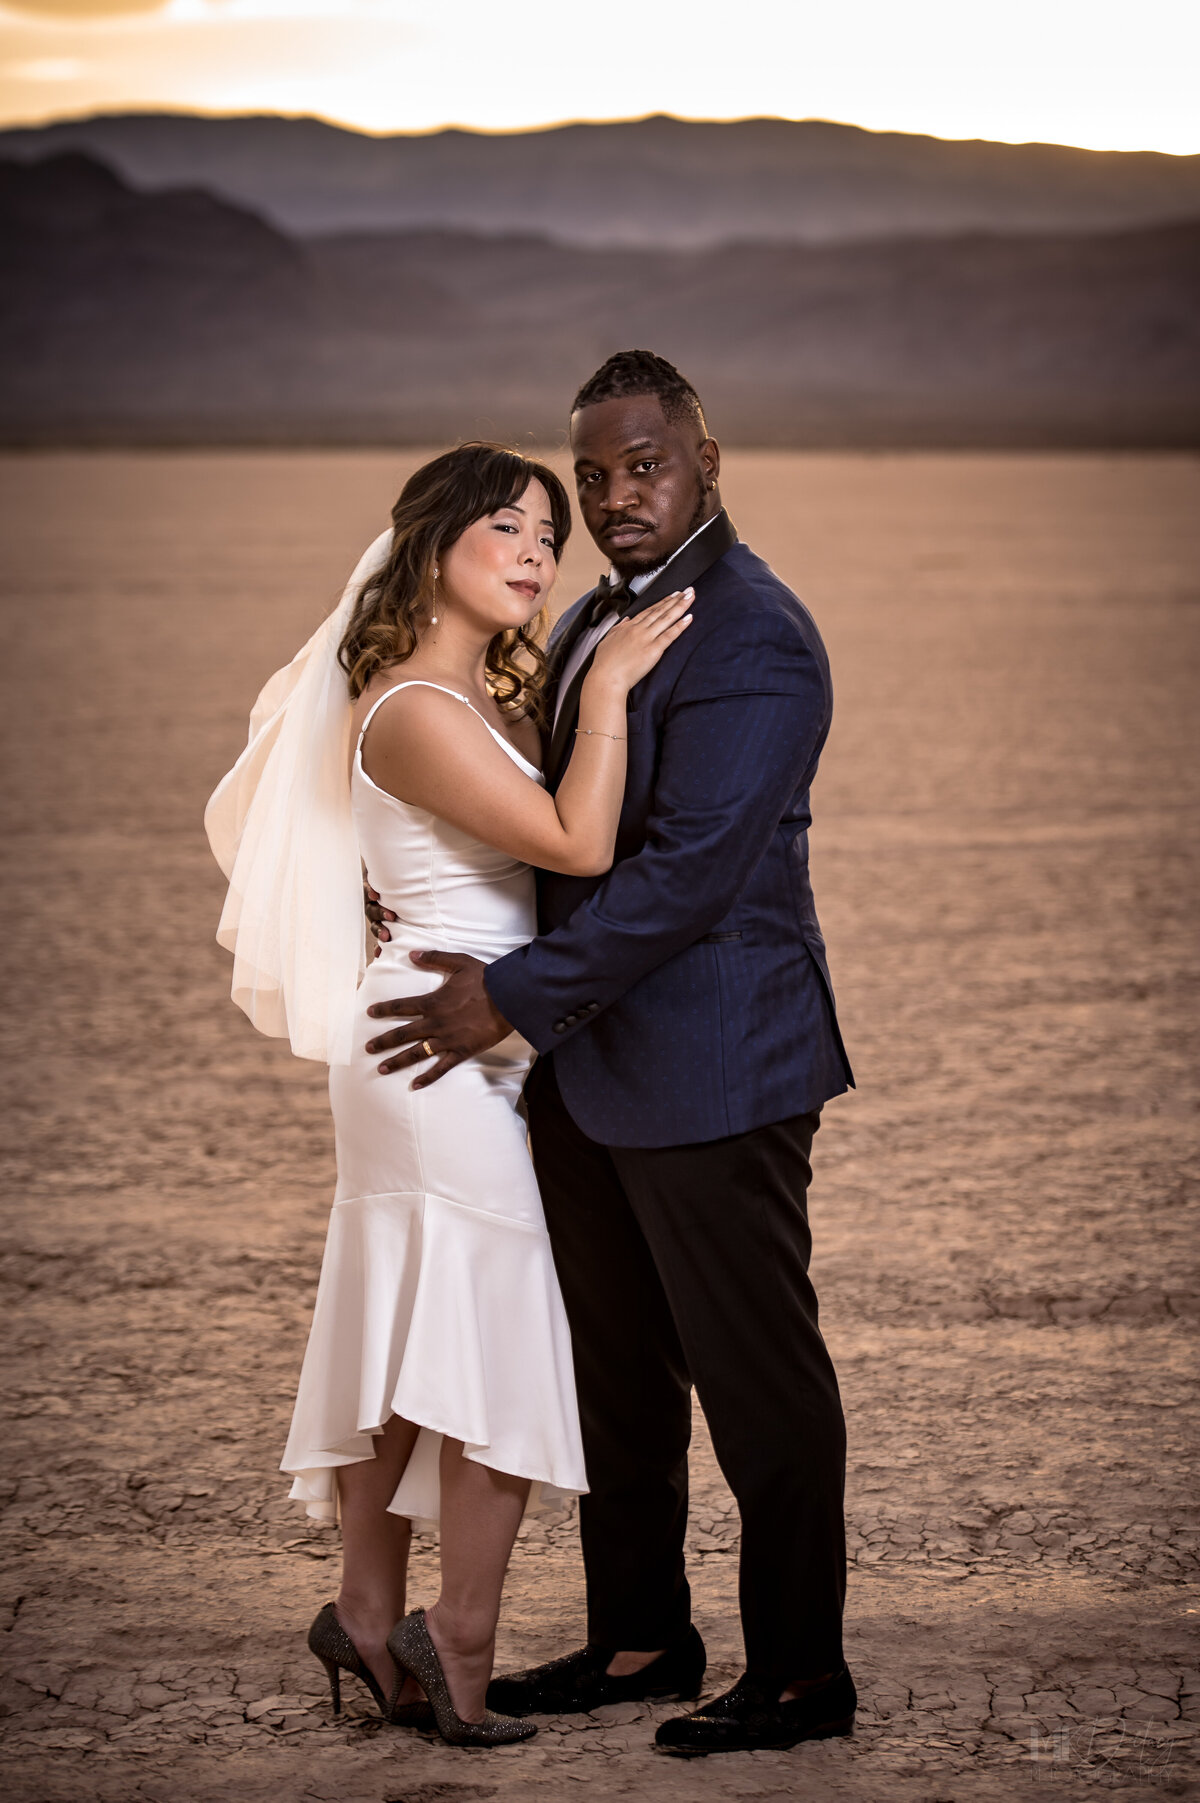 Military  veteran and bride bride and groom look at camer for their first portrait as husband and wife las vegas elopement on the dry lake bed  at golden hour groom in blue suit jacket and black  pants  las vegas elopement eloping in vegas  las vegas wedding photographers las vegas wedding photography mk delacy photography